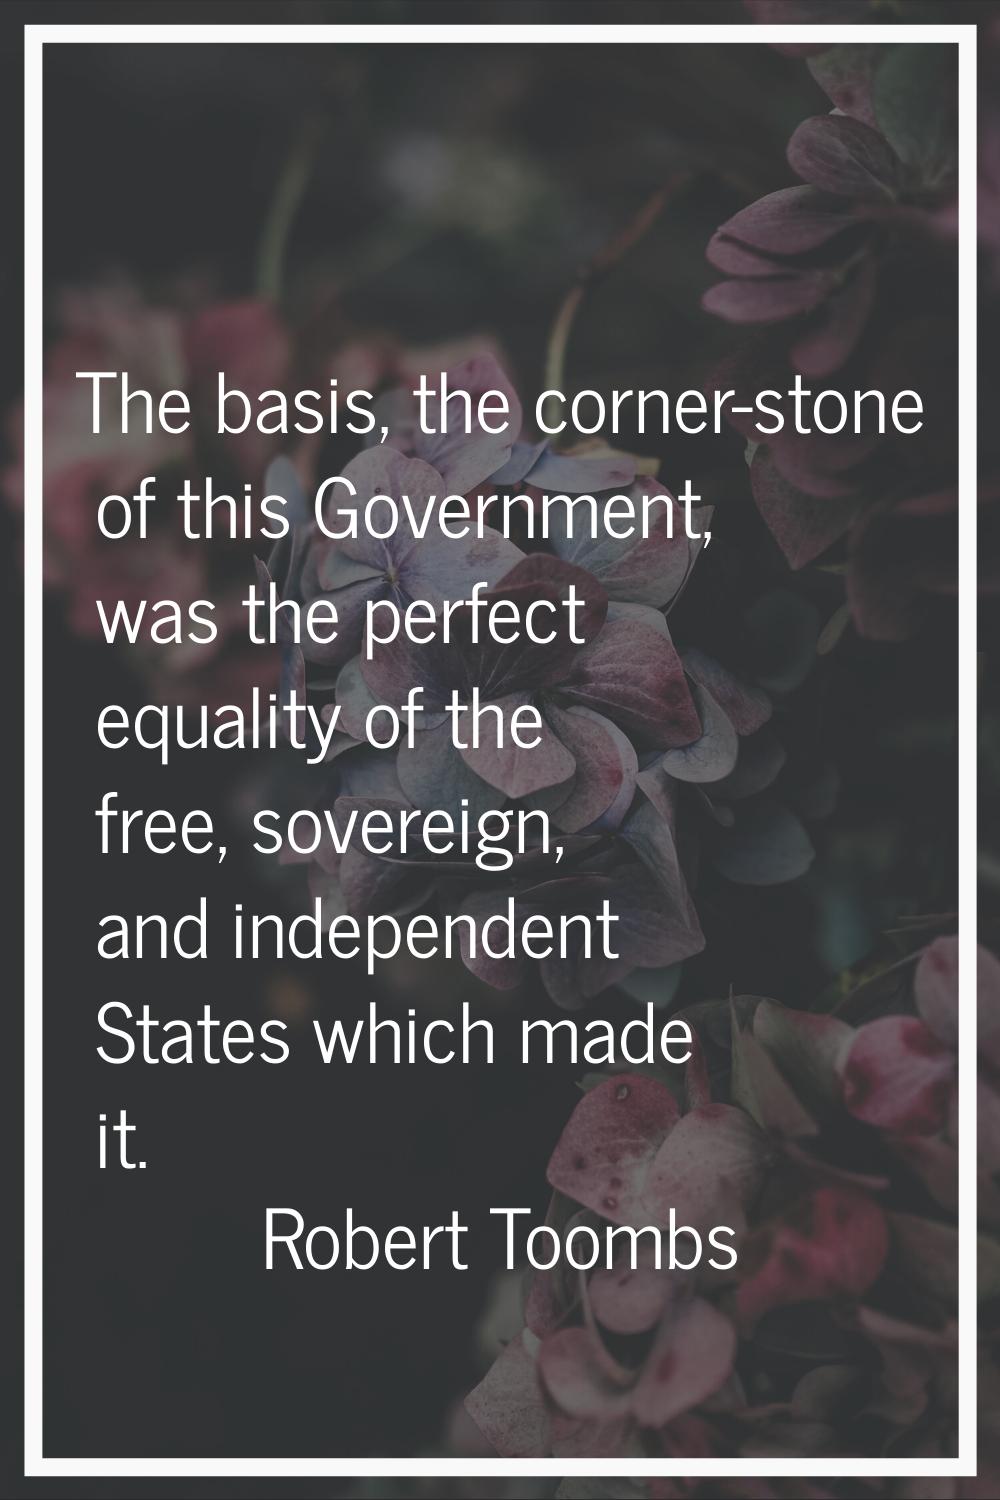 The basis, the corner-stone of this Government, was the perfect equality of the free, sovereign, an